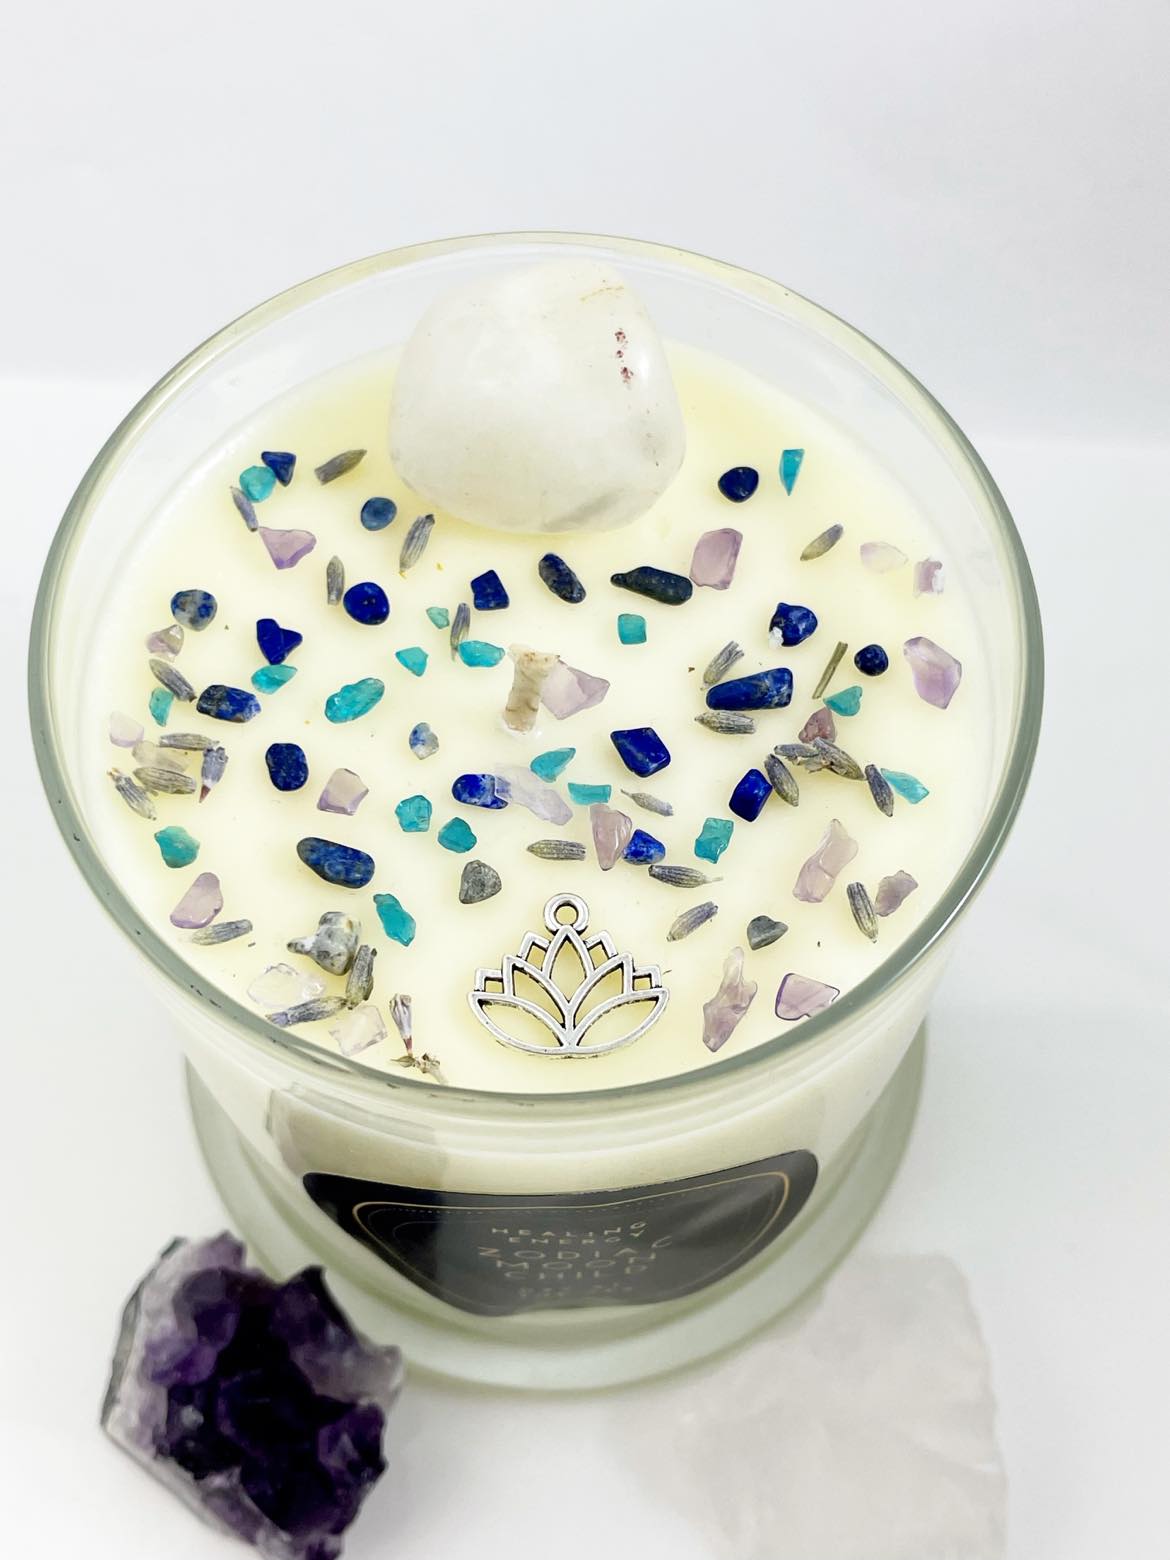 Healing Energy - Day At The Spa - White Tea - Moon Stone - Crystal Candle Spiritual Collection - Crystal Herb Candle - 100% Natural Soy Wax